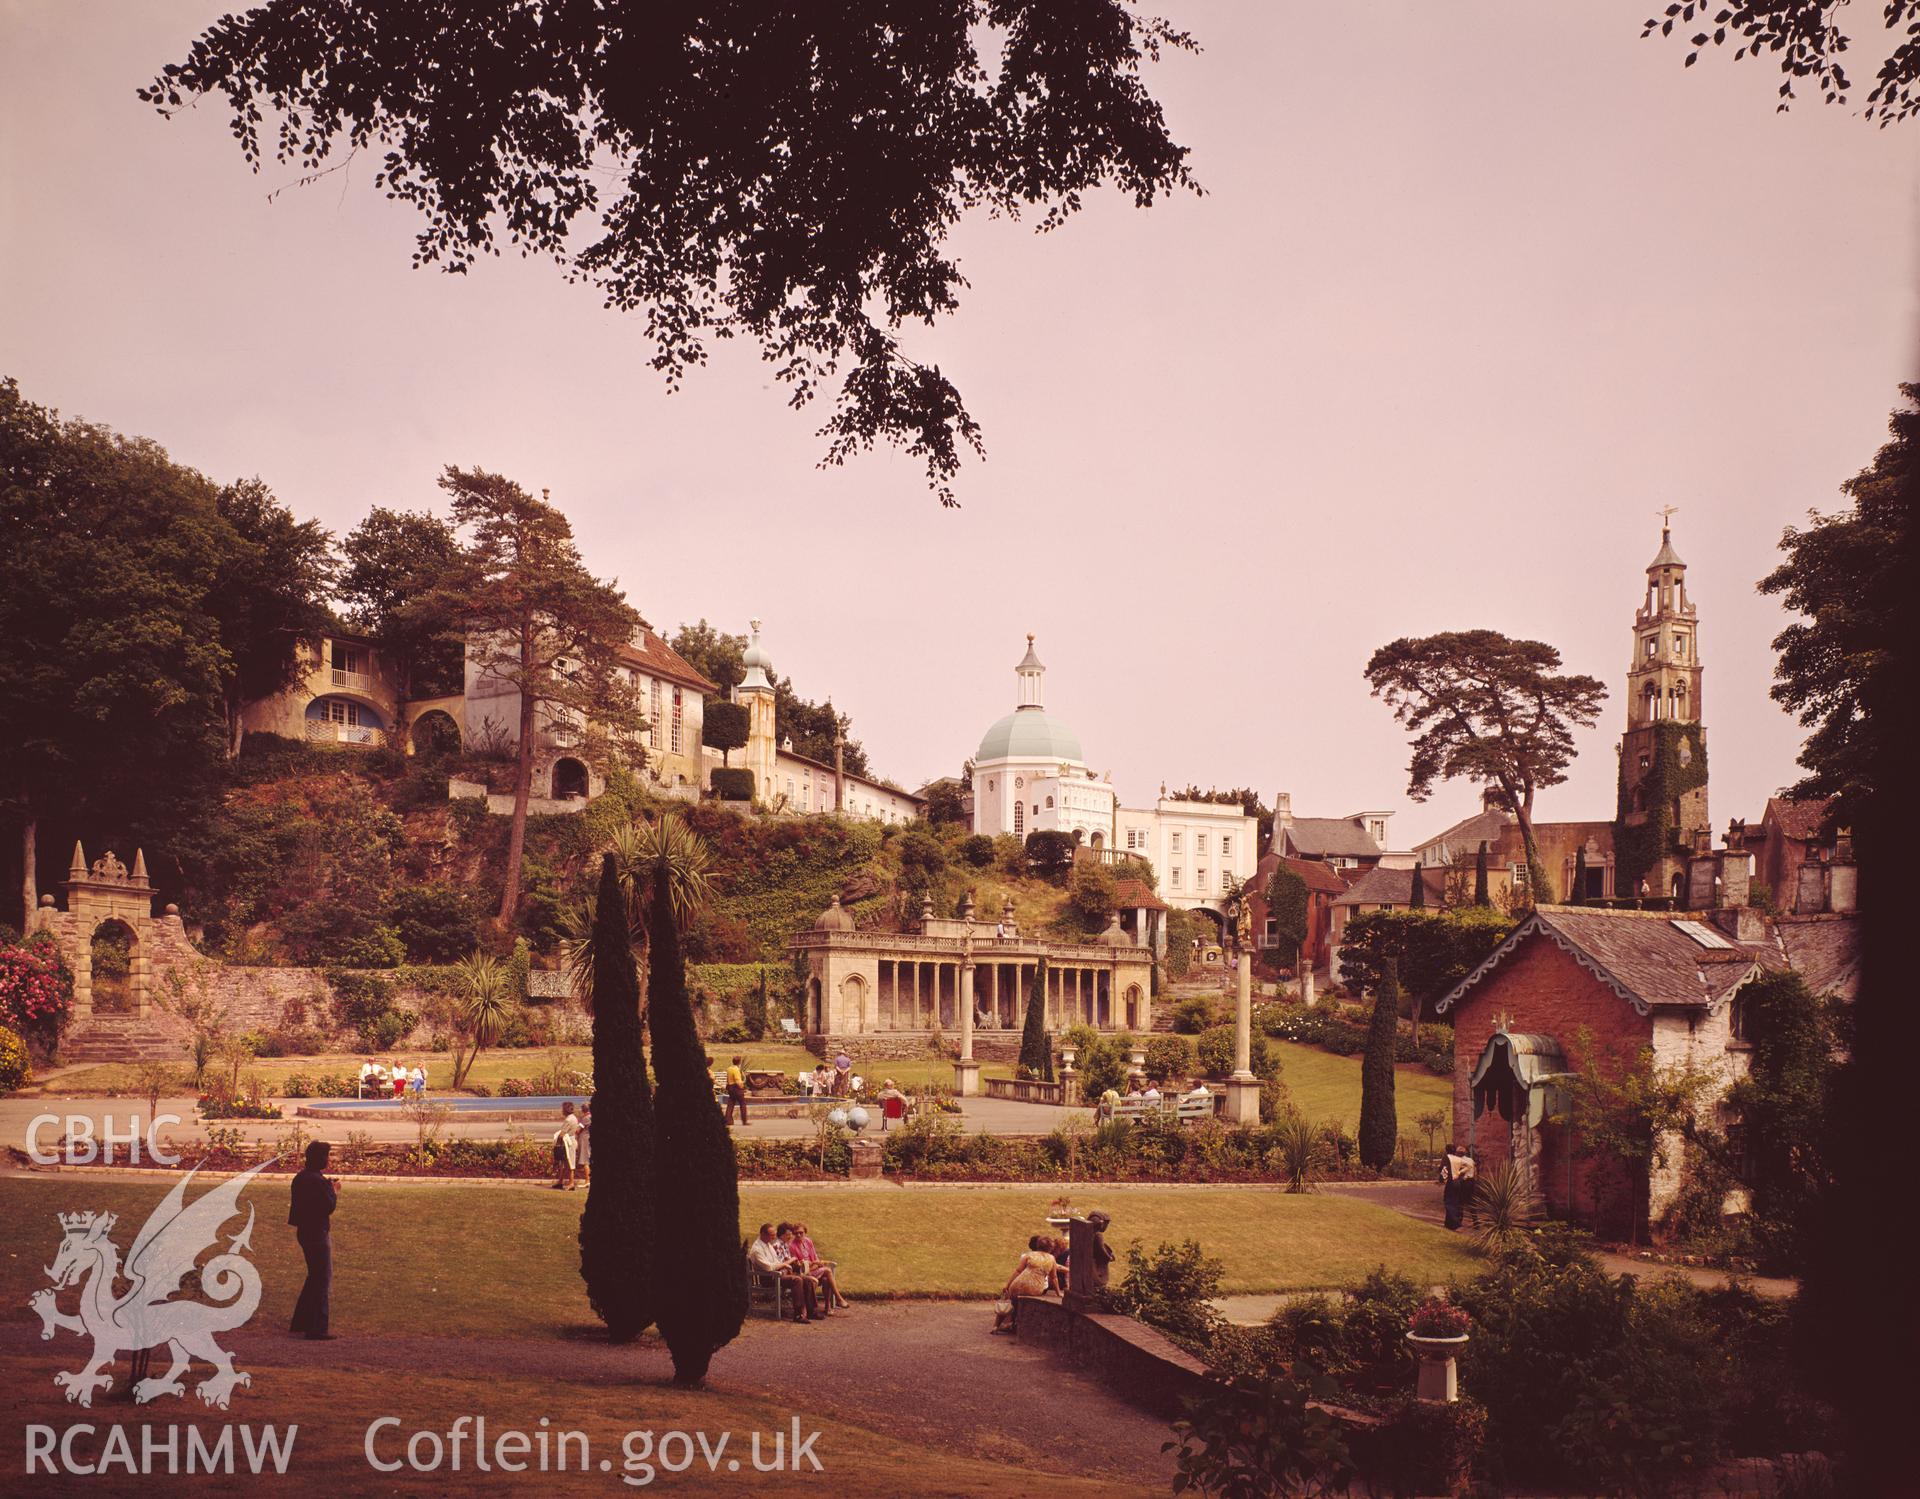 1 colour transparency showing view of Portmeirion village; collated by the former Central Office of Information.